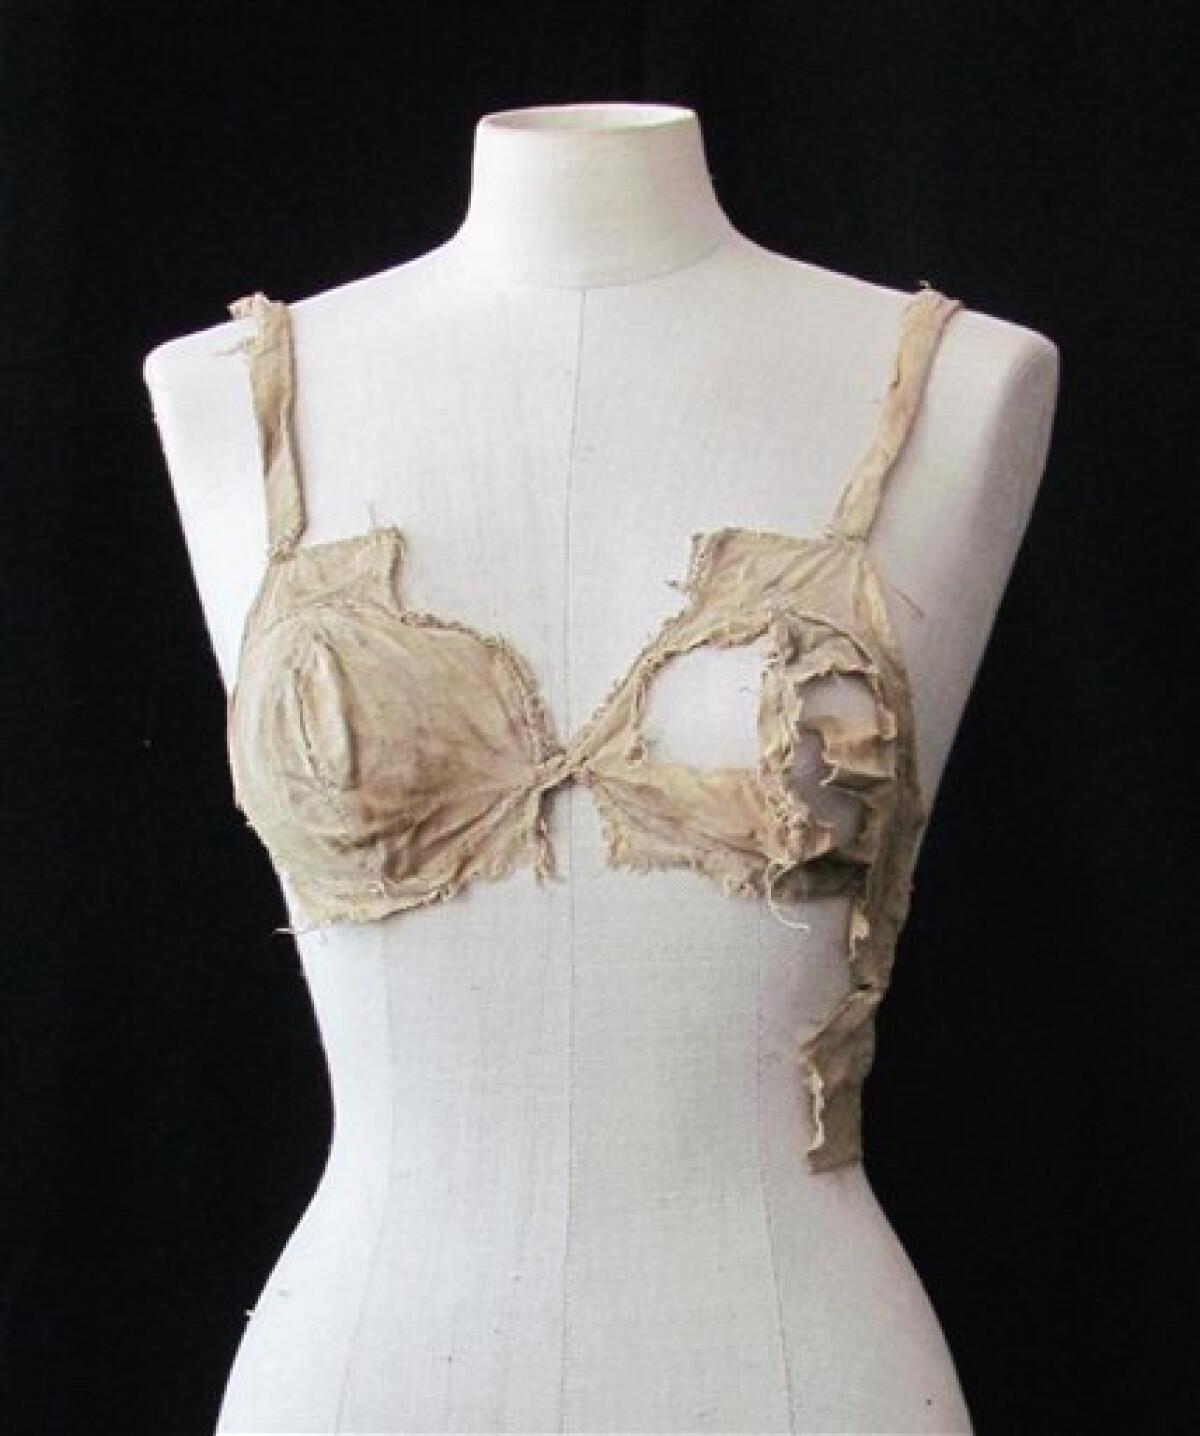 Dolores Of St. Paul Vintage Bra Pattern, Adopted Dolores Of…